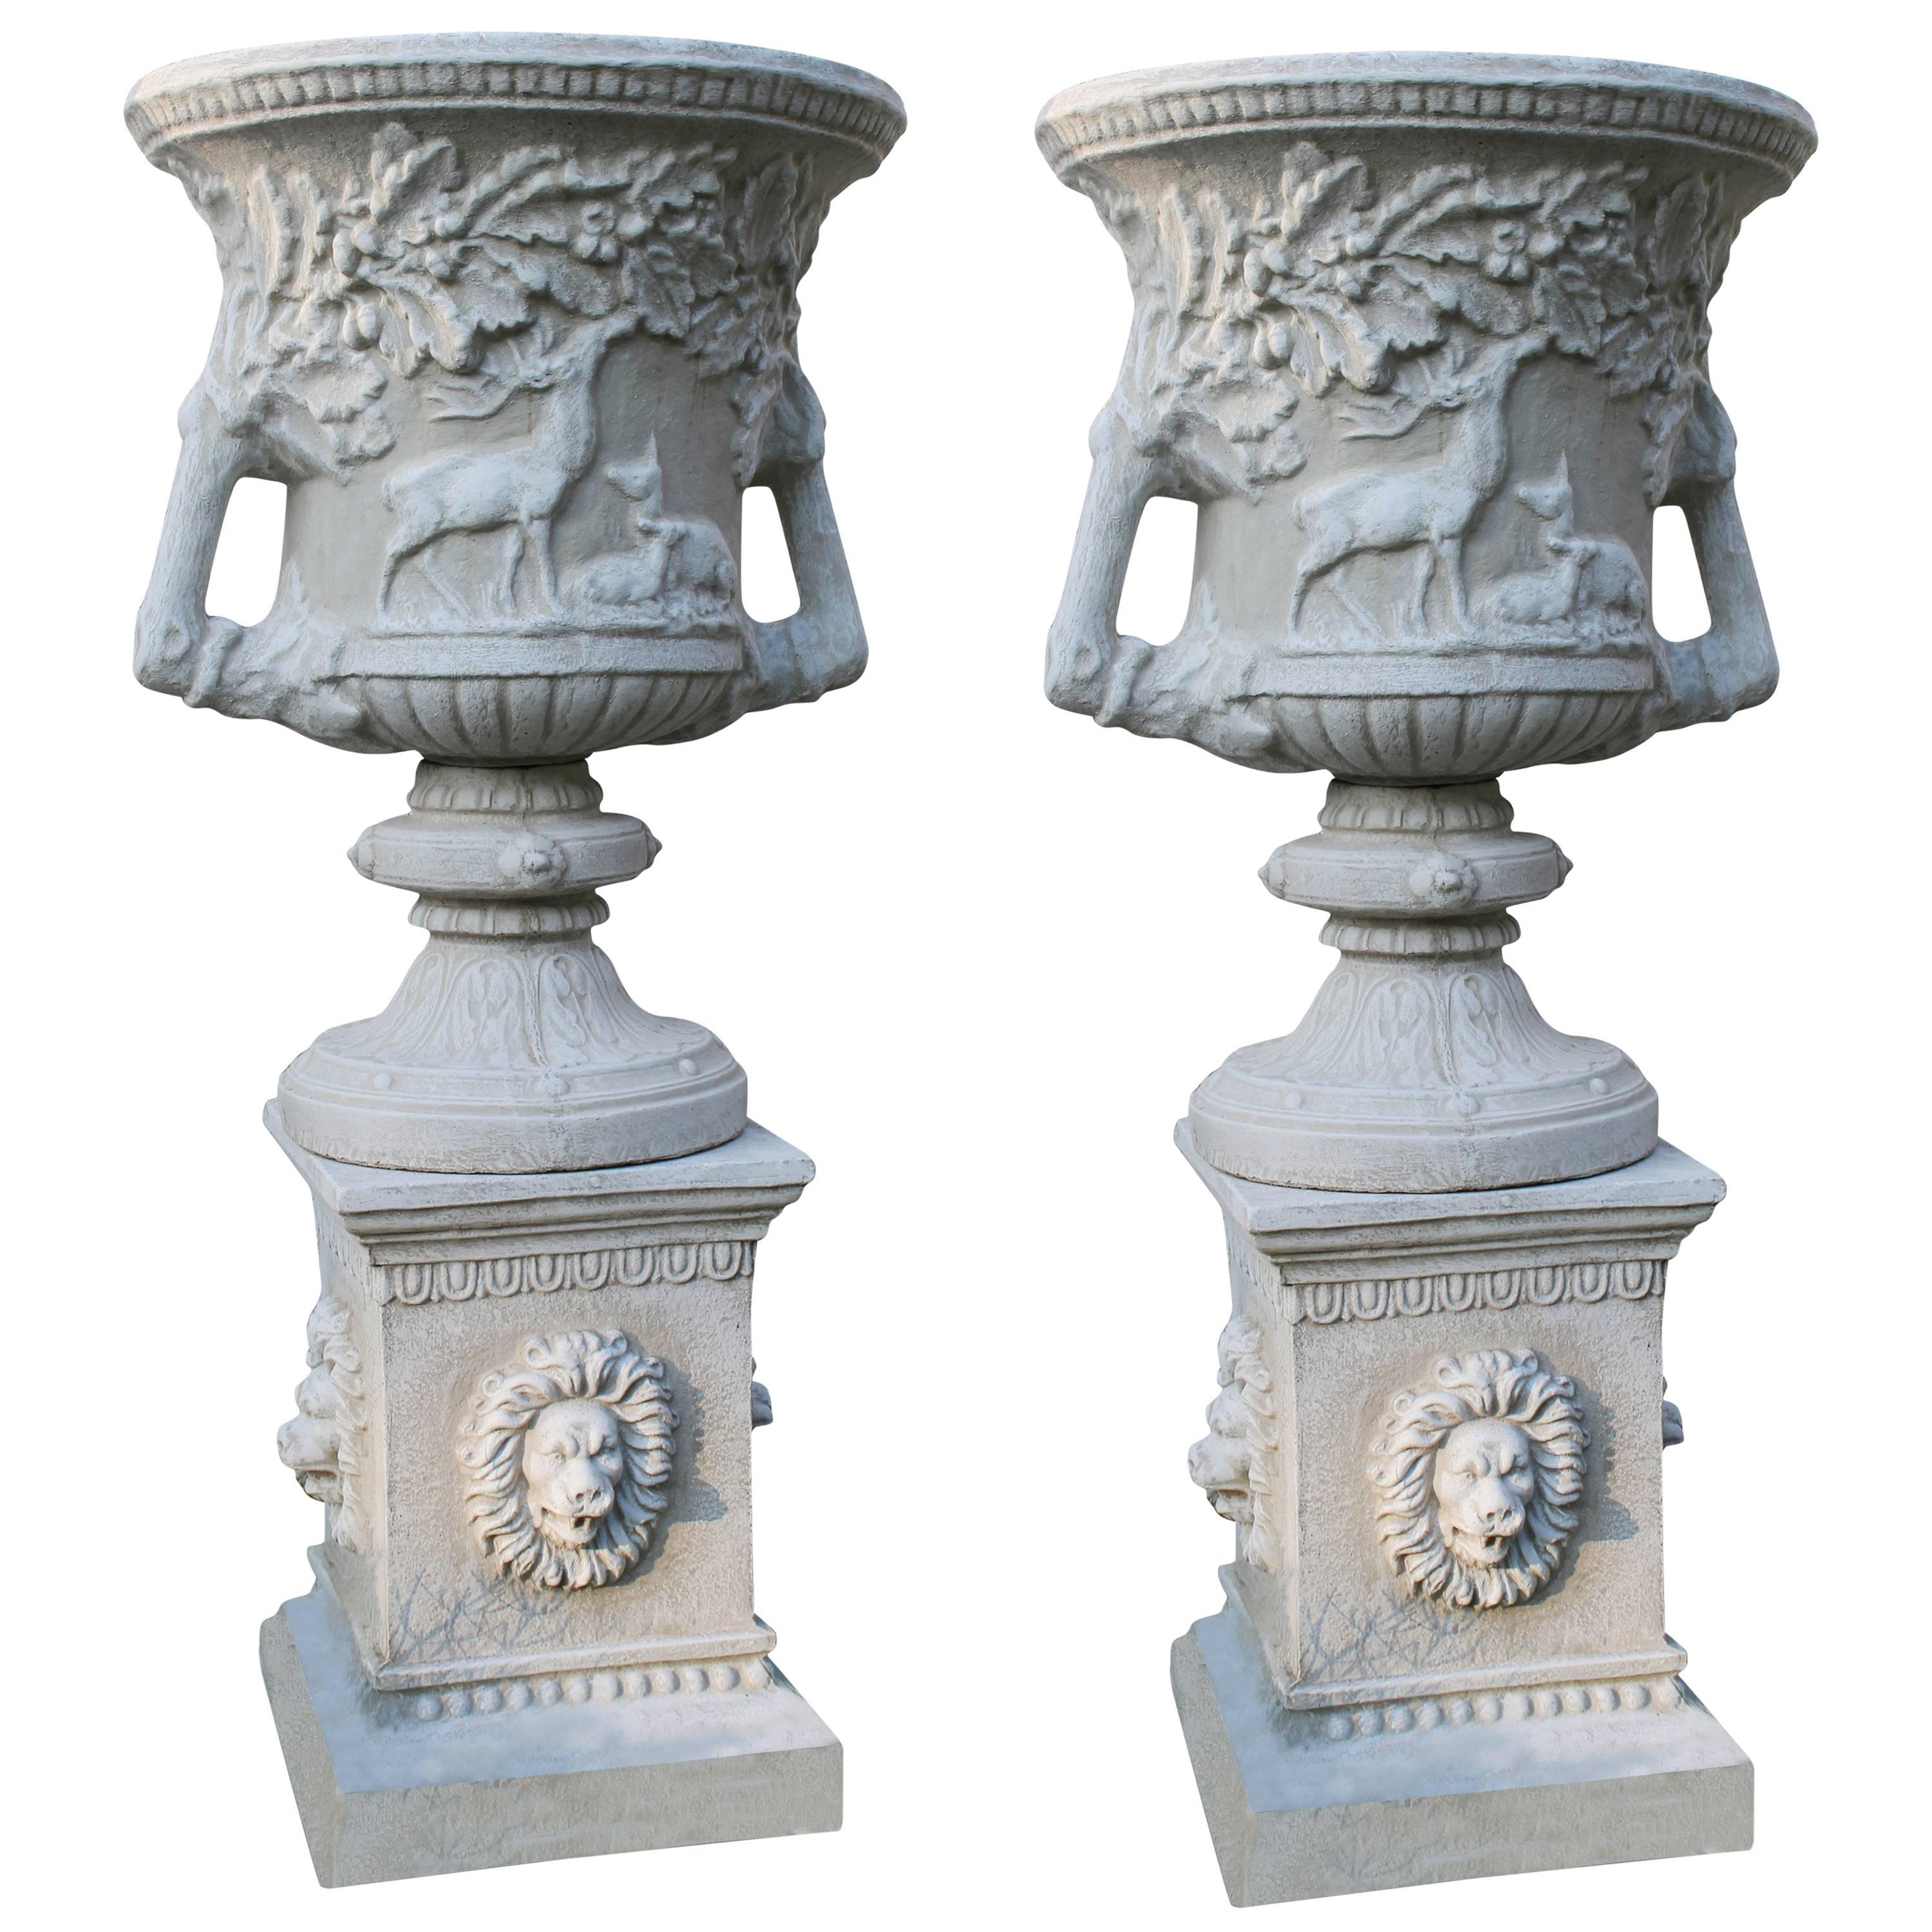 Pair of Heavy Classical Style Garden Urns For Sale